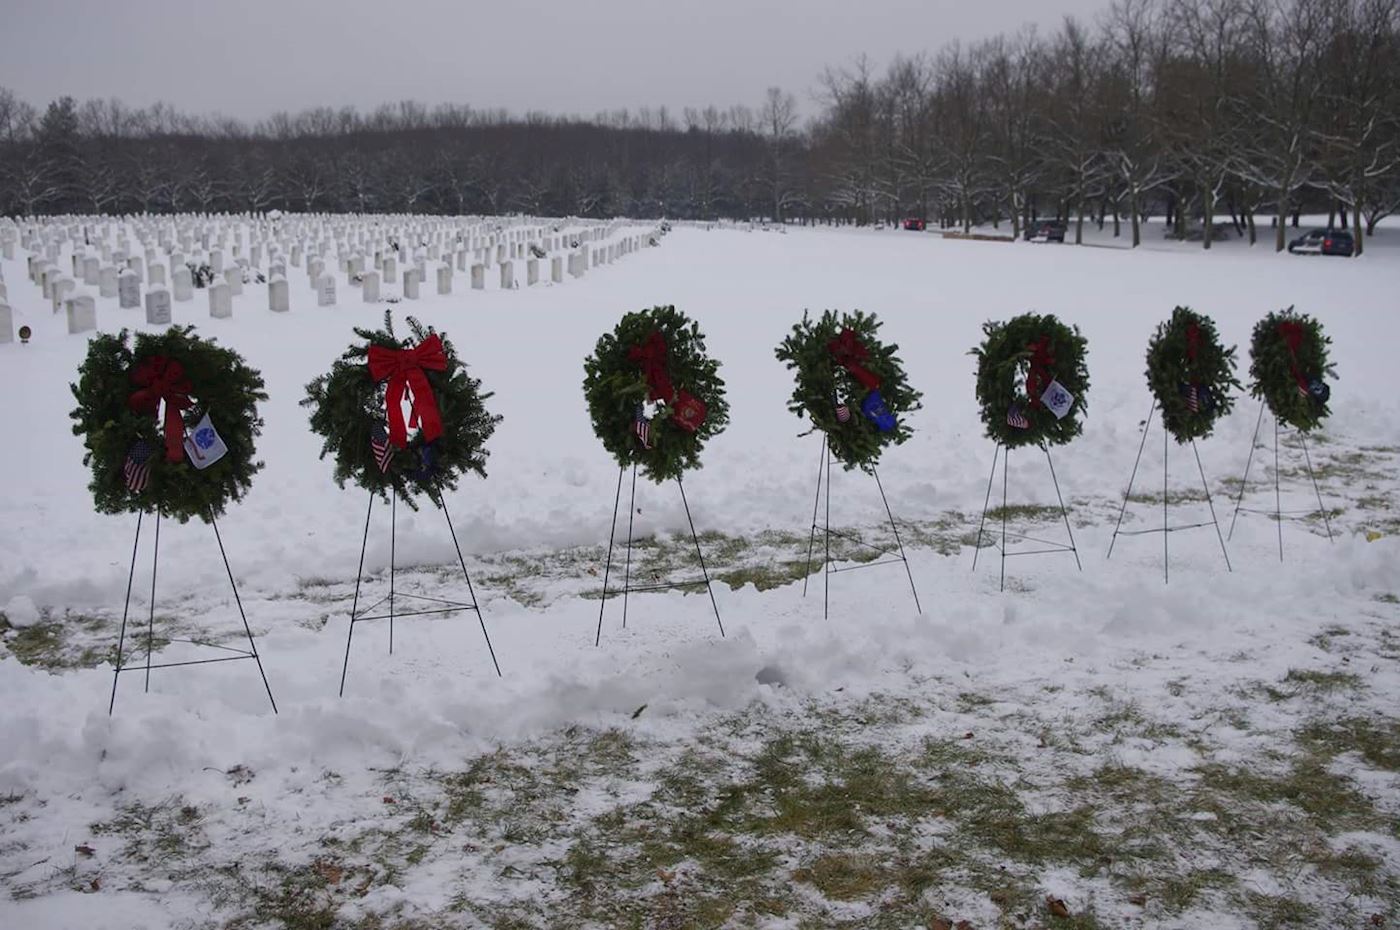 Ceremonial wreaths placed by Royal Charter Composite Squadron, Civil Air Patrol, US Air Force Auxiliary Cadets at the State Veterans Cemetery in Middletown on national Wreaths Across America Day December 17, 2016